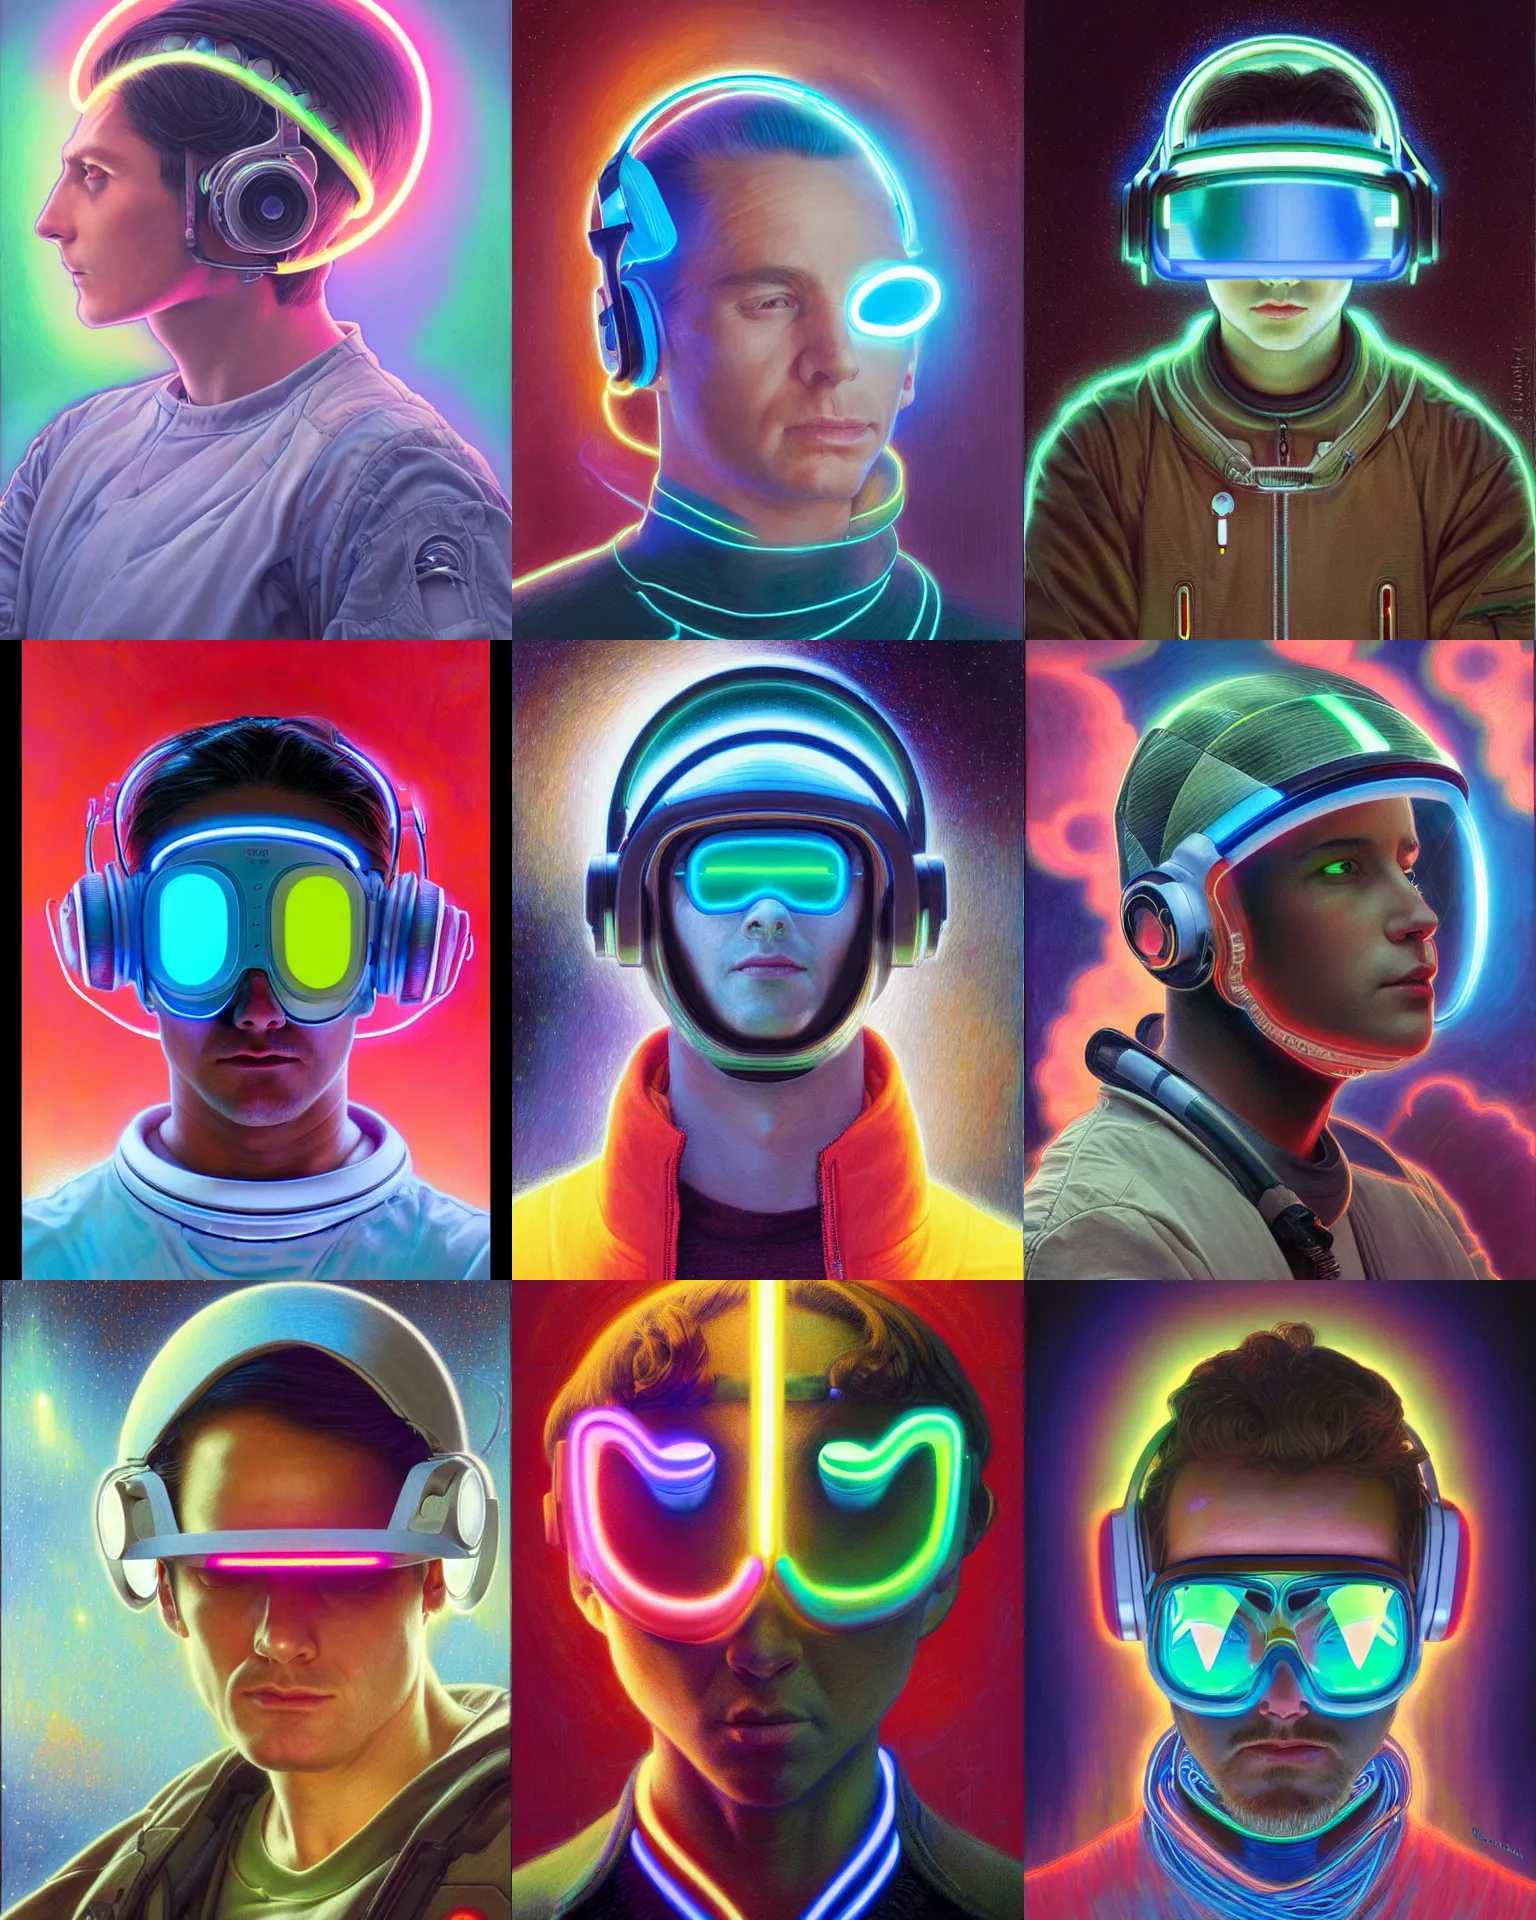 Prompt: future coder, glowing visor over eyes and sleek neon headphones headshot desaturated profile portrait colored pencil painting by donato giancola, dean cornwall, rhads, tom whalen, alex grey, alphonse mucha, astronaut cyberpunk electric fashion photography